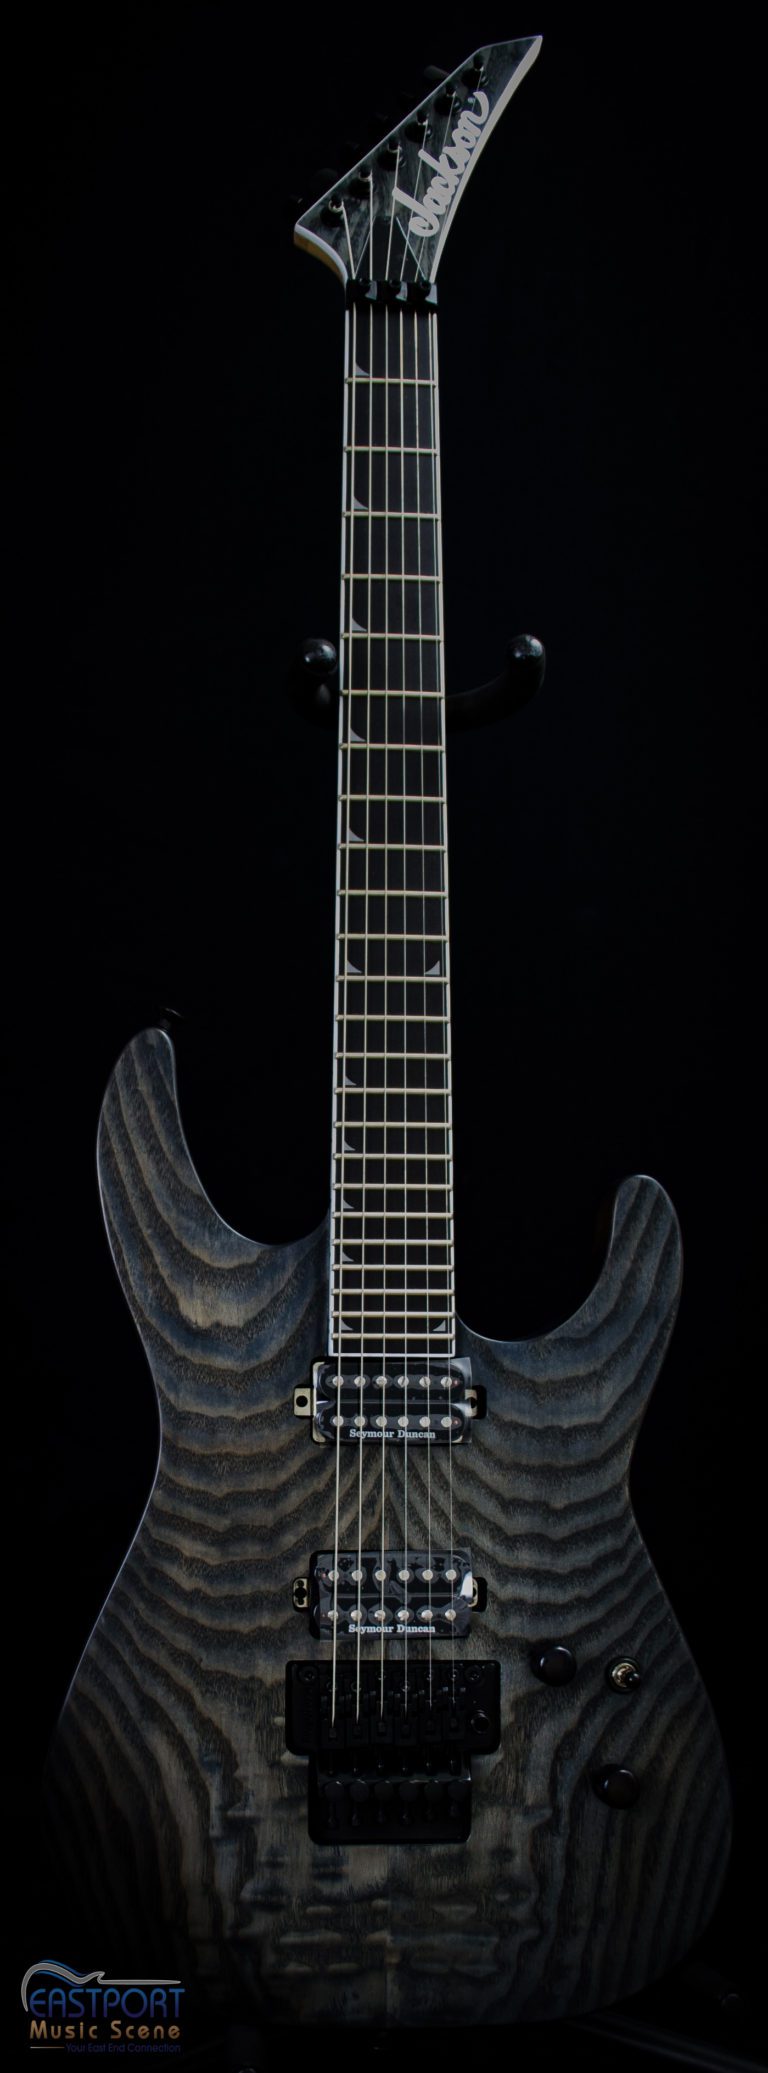 A black electric guitar with a wooden design on it.